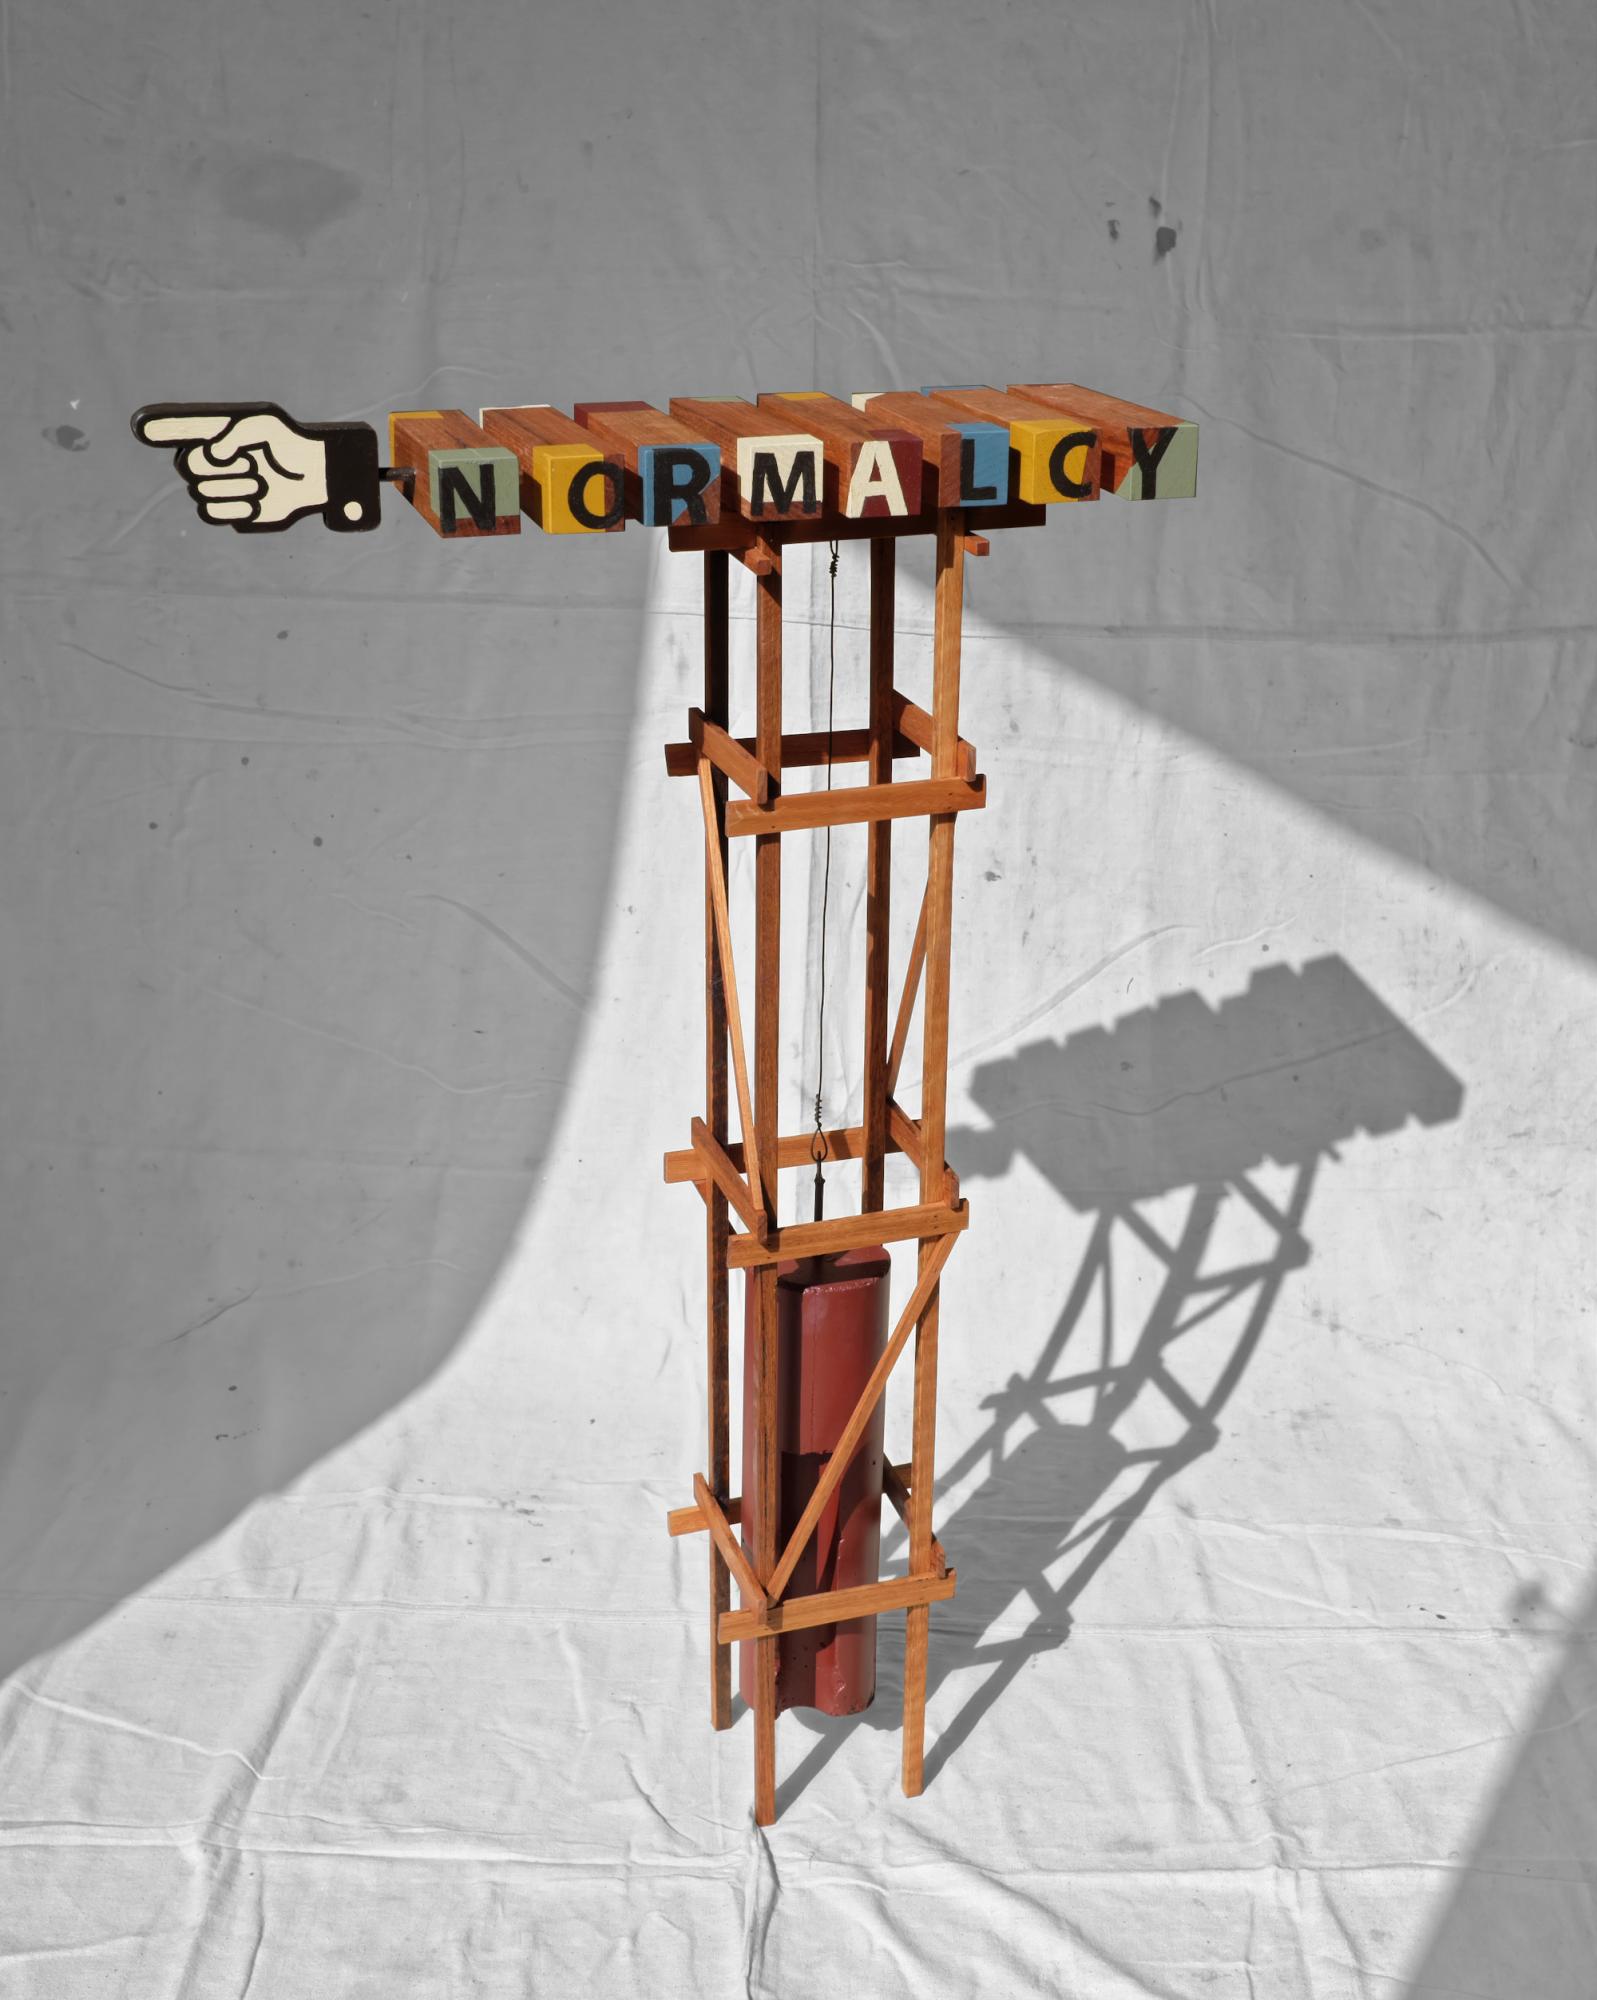 Normalcy -  Sign of Normalcy, 2020   Concrete, Timber, Wire, Acrylic...